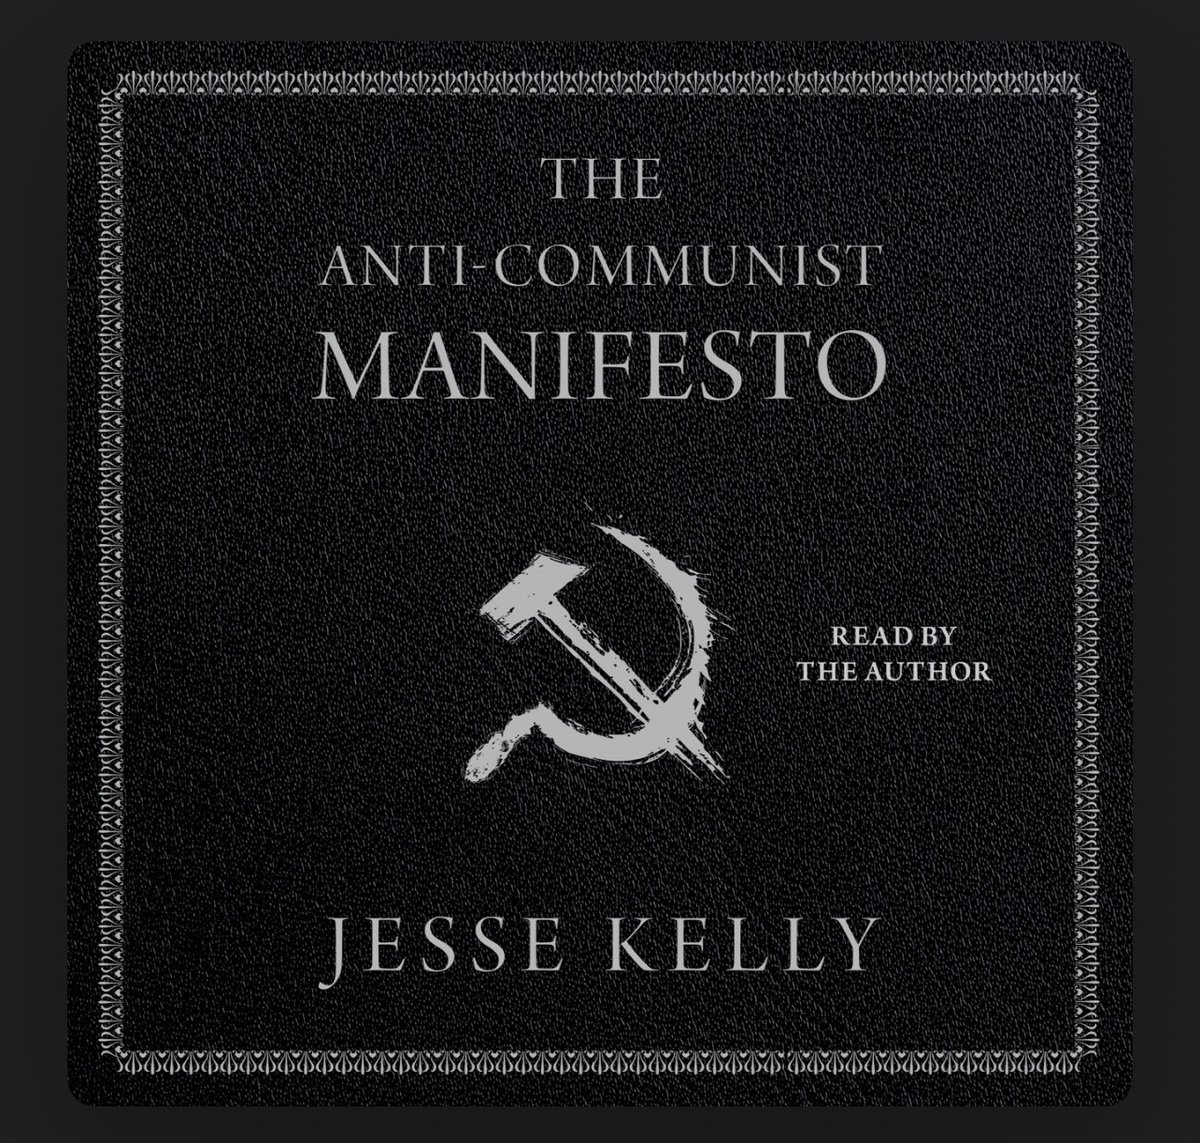 “Under the cloak of preventing the end of the world, the belief in man-made climate change has become the perfect excuse for regulating and controlling the world population.” - @JesseKellyDC 

Environmentalism is a communist death cult.